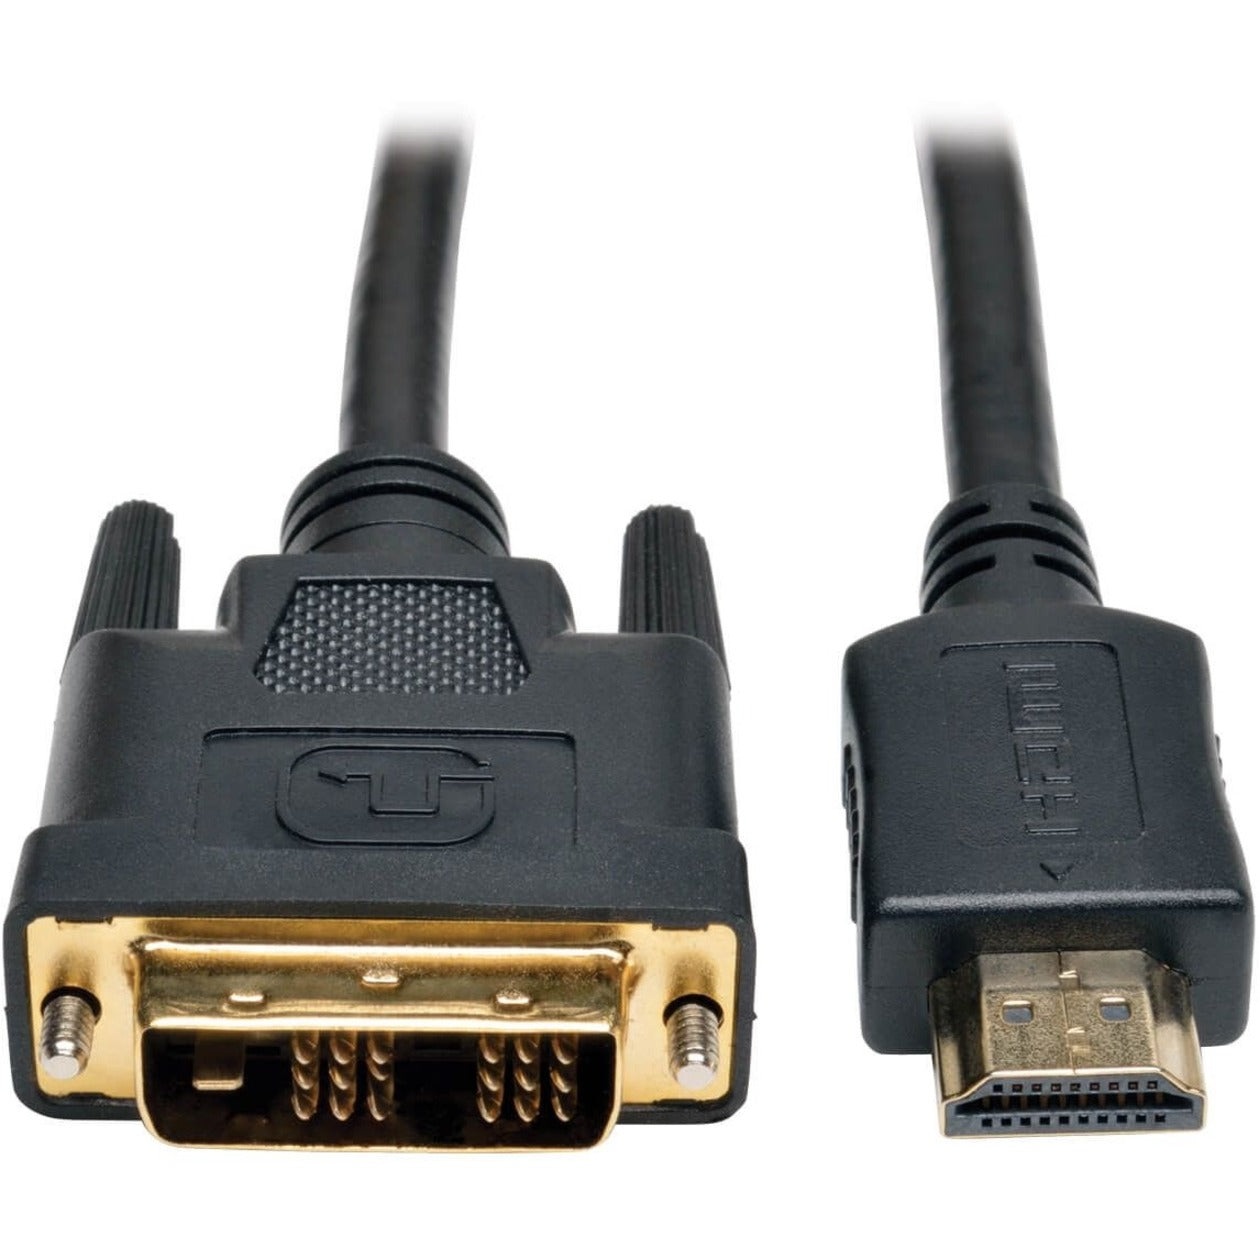 Tripp Lite P566-050 HDMI to DVI Cable, 50-ft. Digital Monitor Adapter Cable, Gold-Plated, 5 Gbit/s Data Transfer Rate